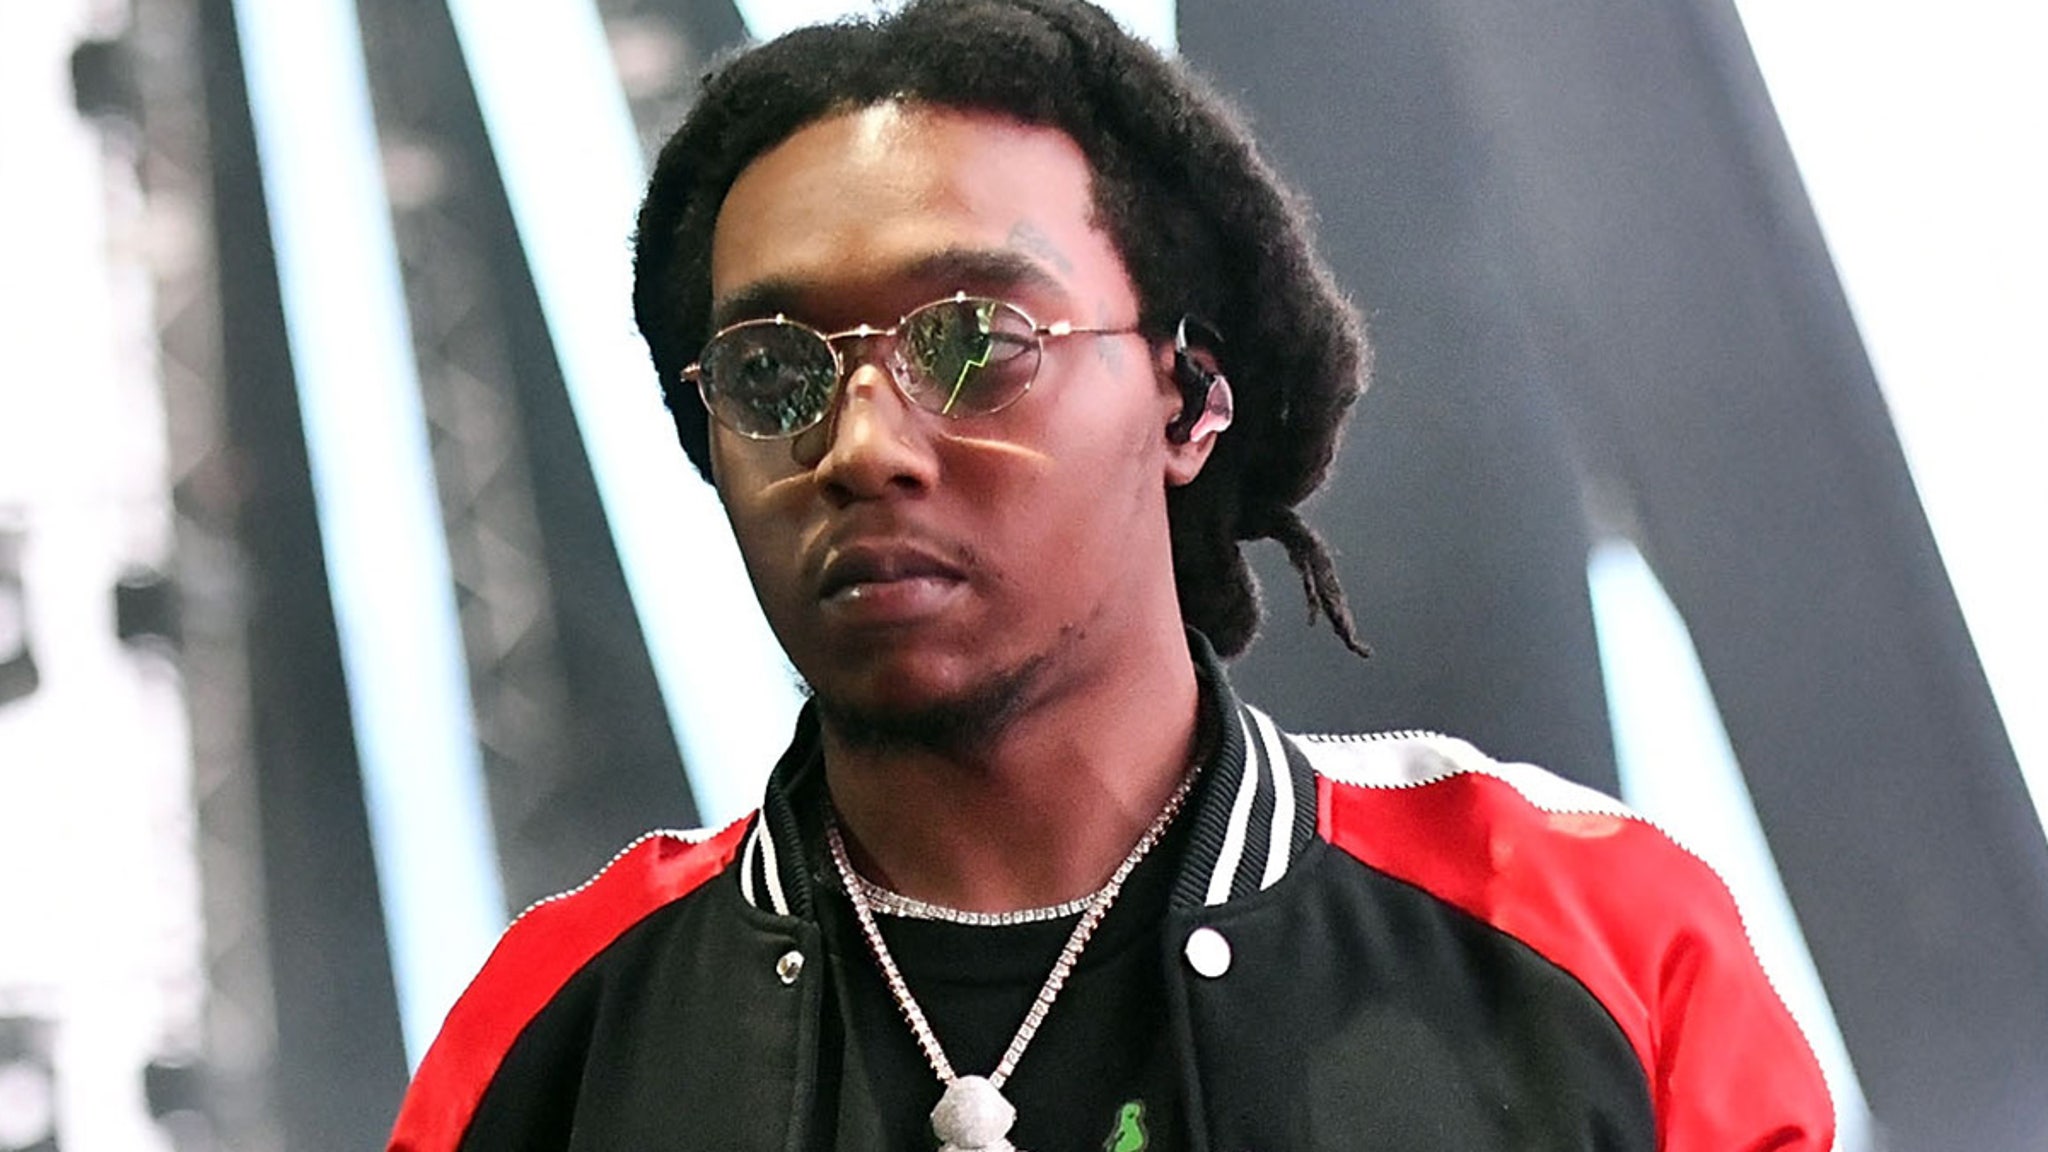 Migos Rapper Takeoff's Alleged Murderer Arrested in Houston for Shooting